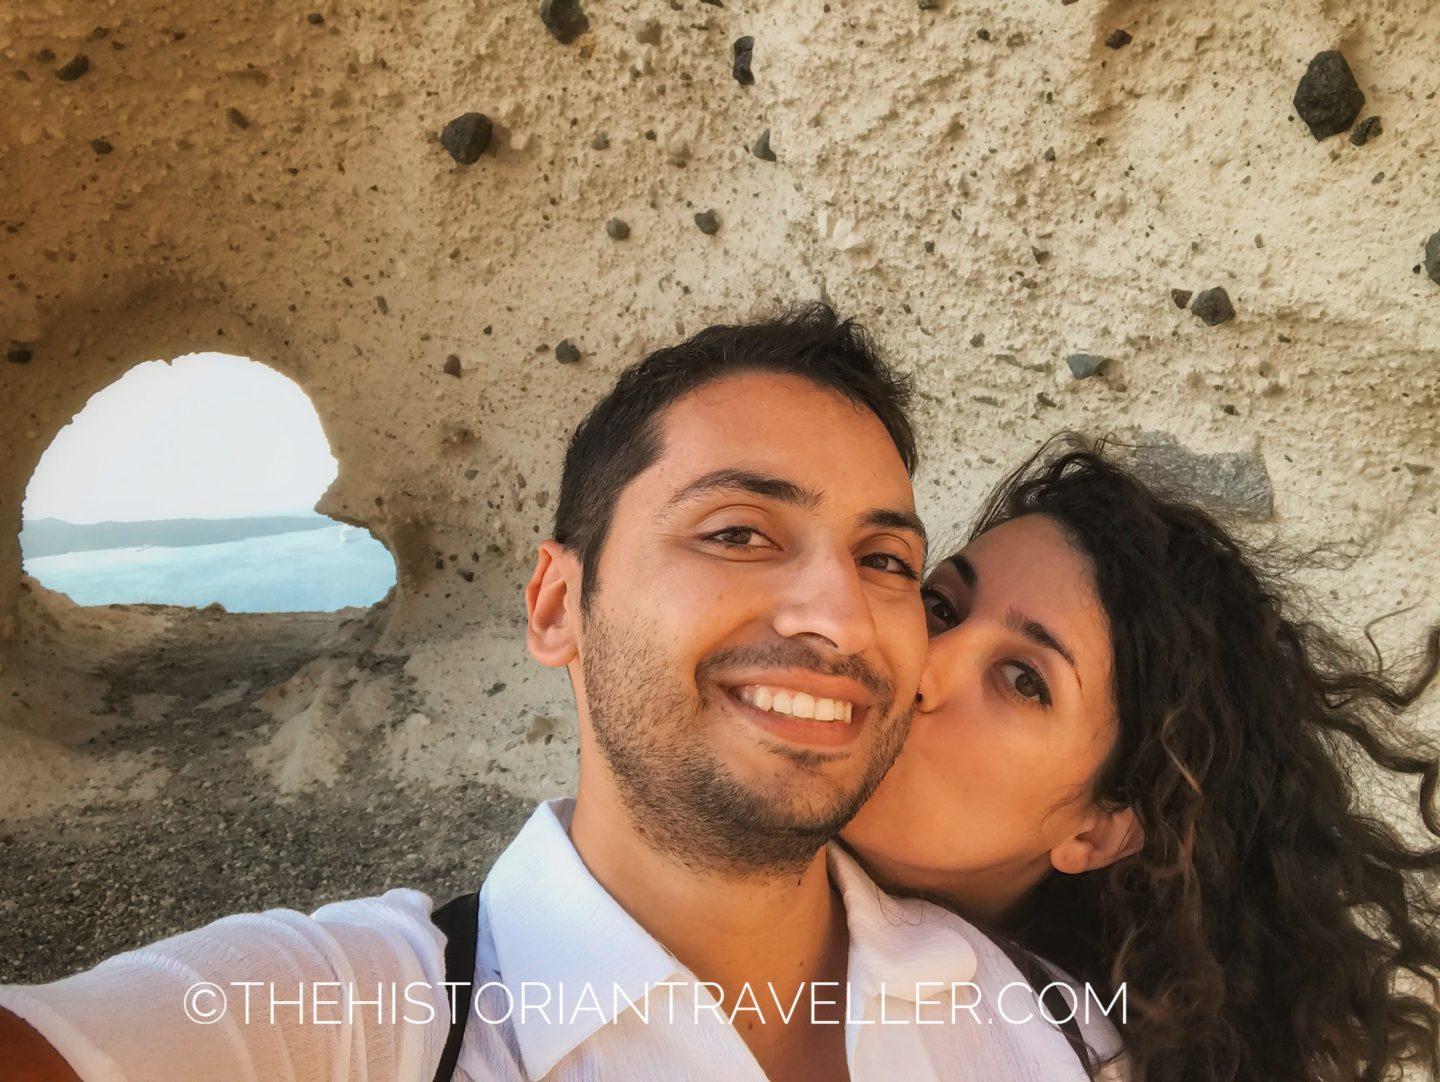 Laura and Alessio with the heart of Santorini